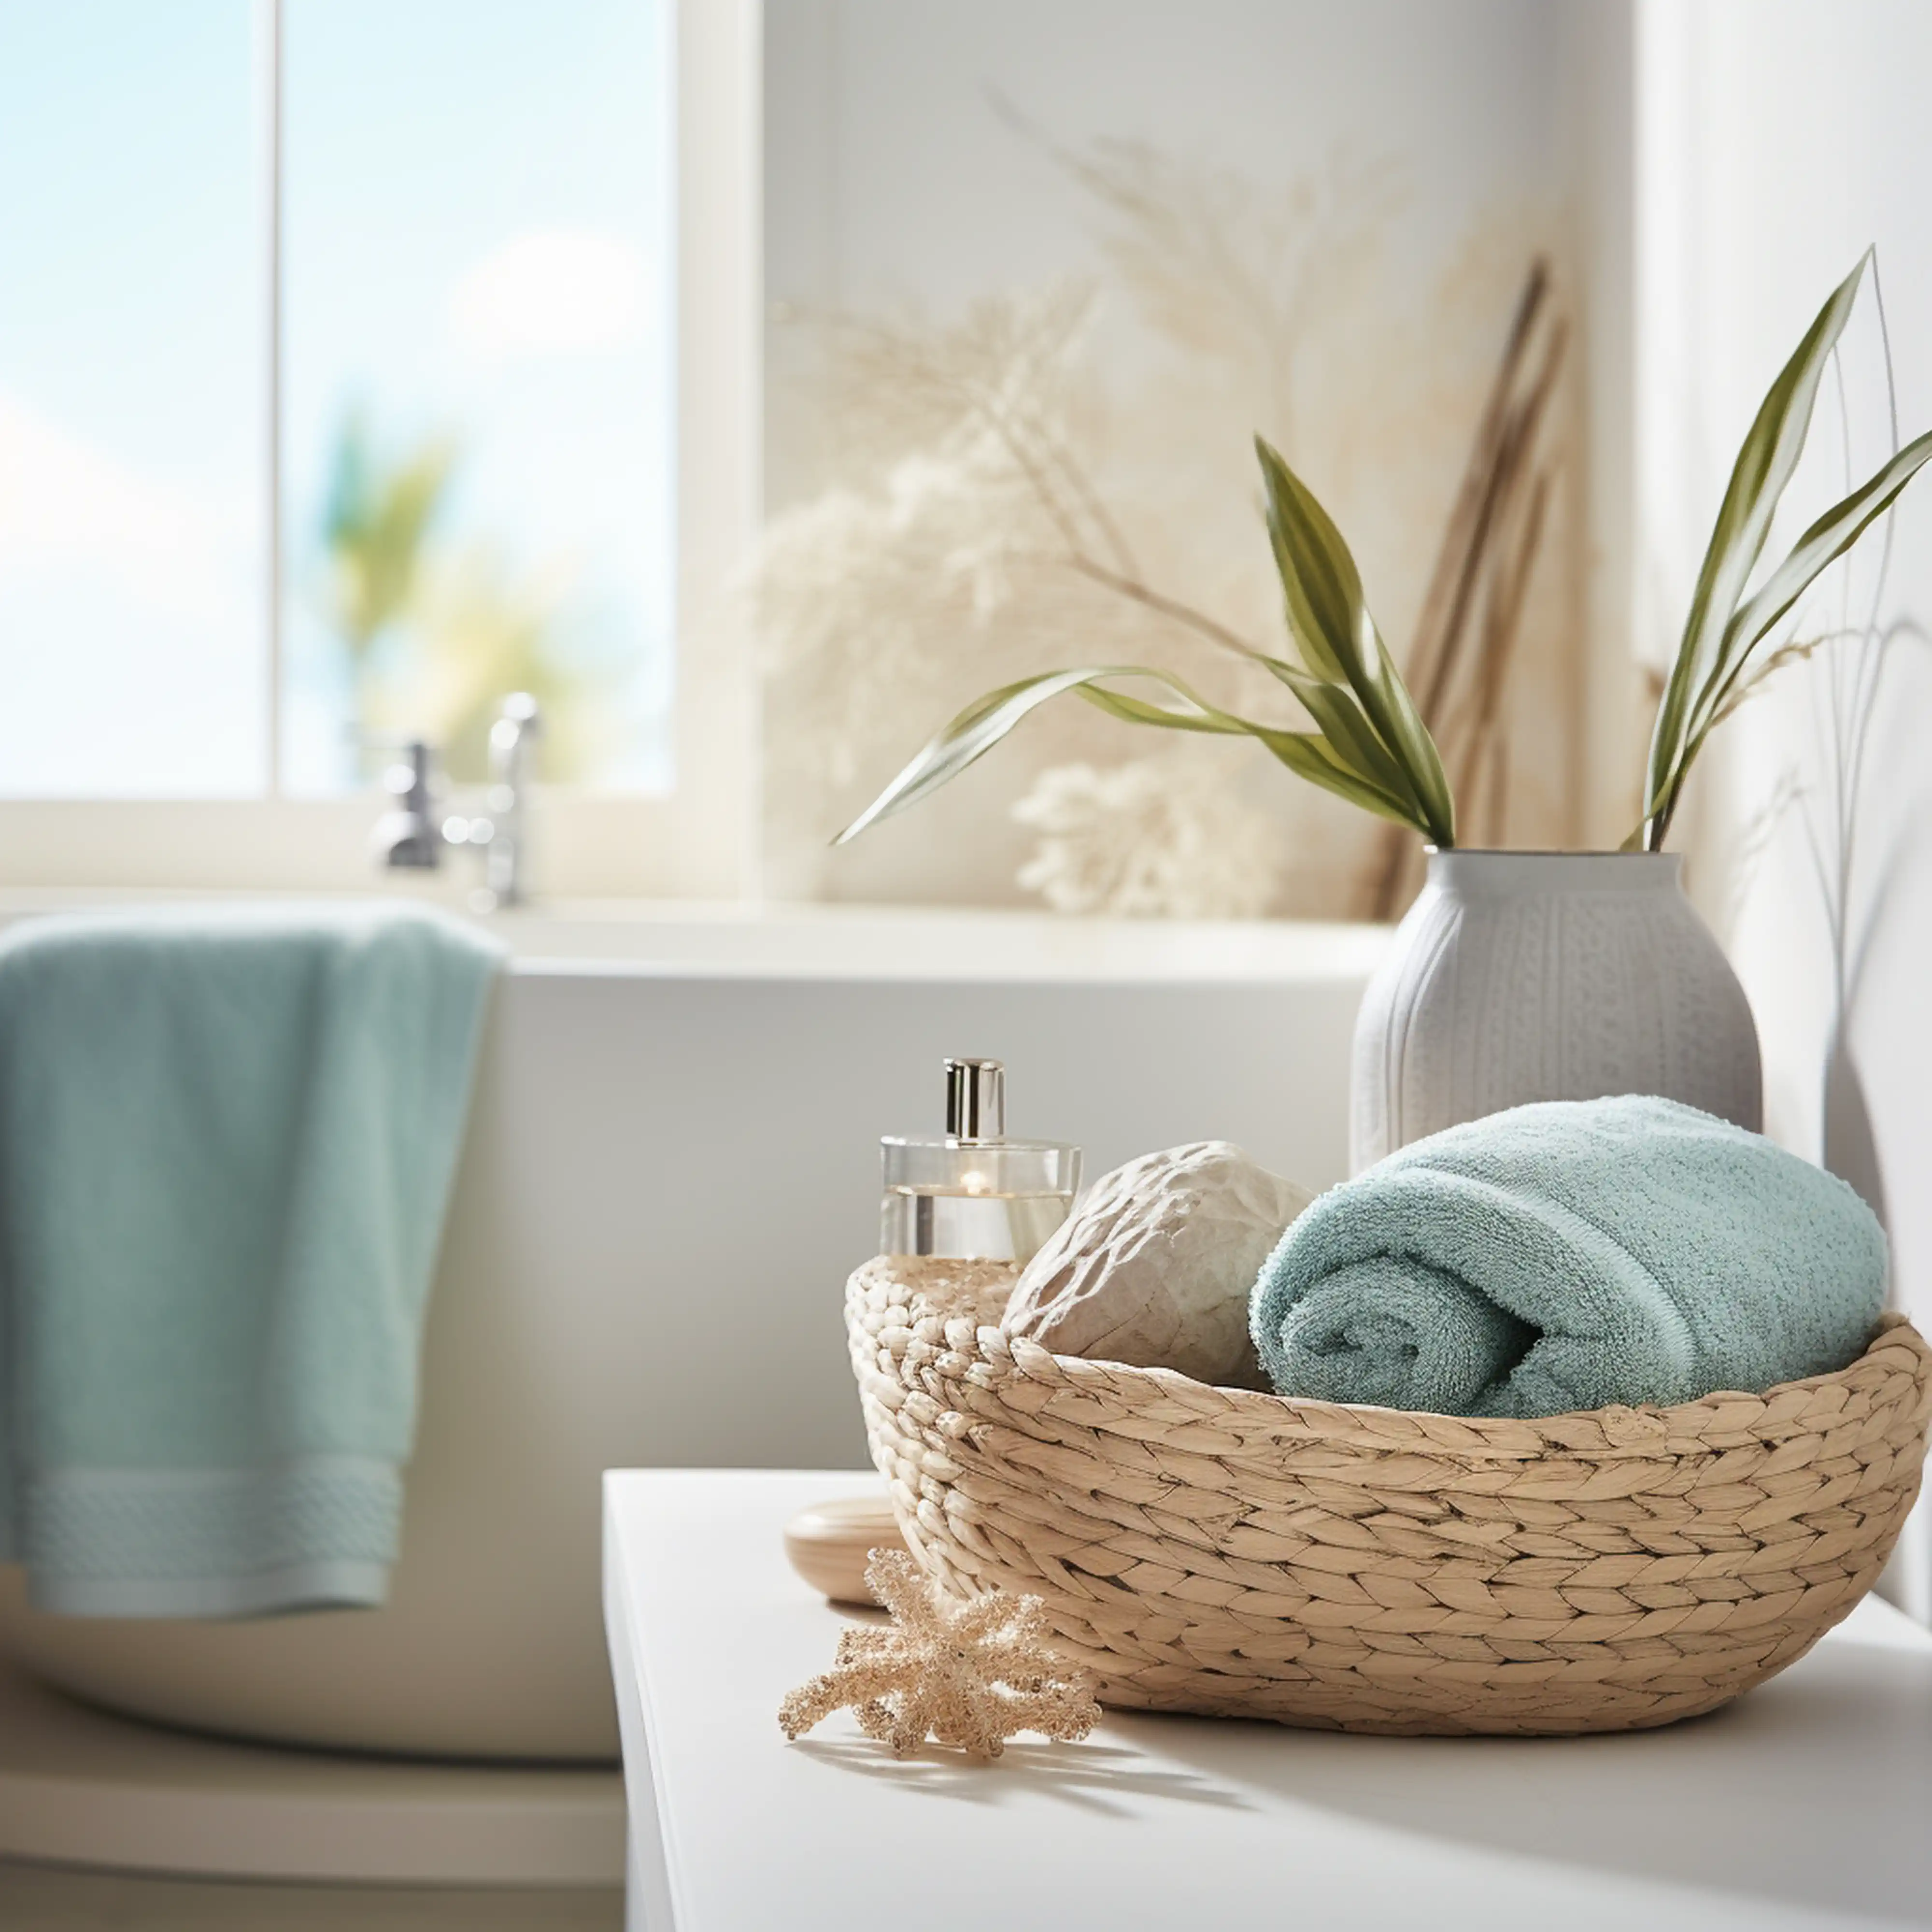 Elegant bathroom with coastal accessories including a woven basket and a pale blue towel, interior by Sarah Brown Design